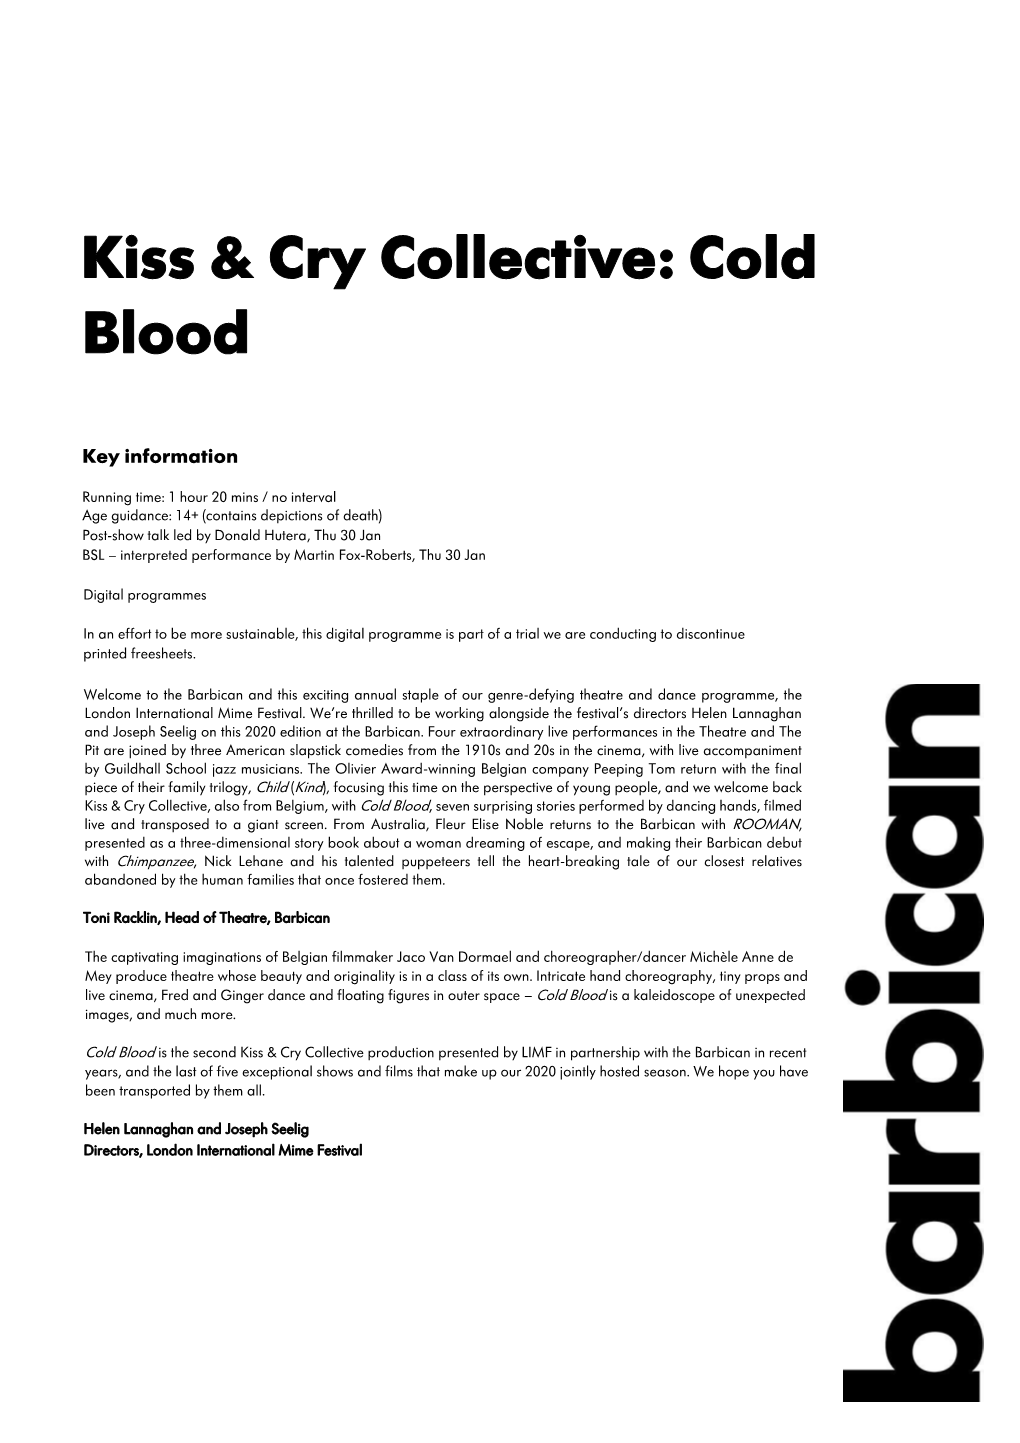 Kiss & Cry Collective: Cold Blood